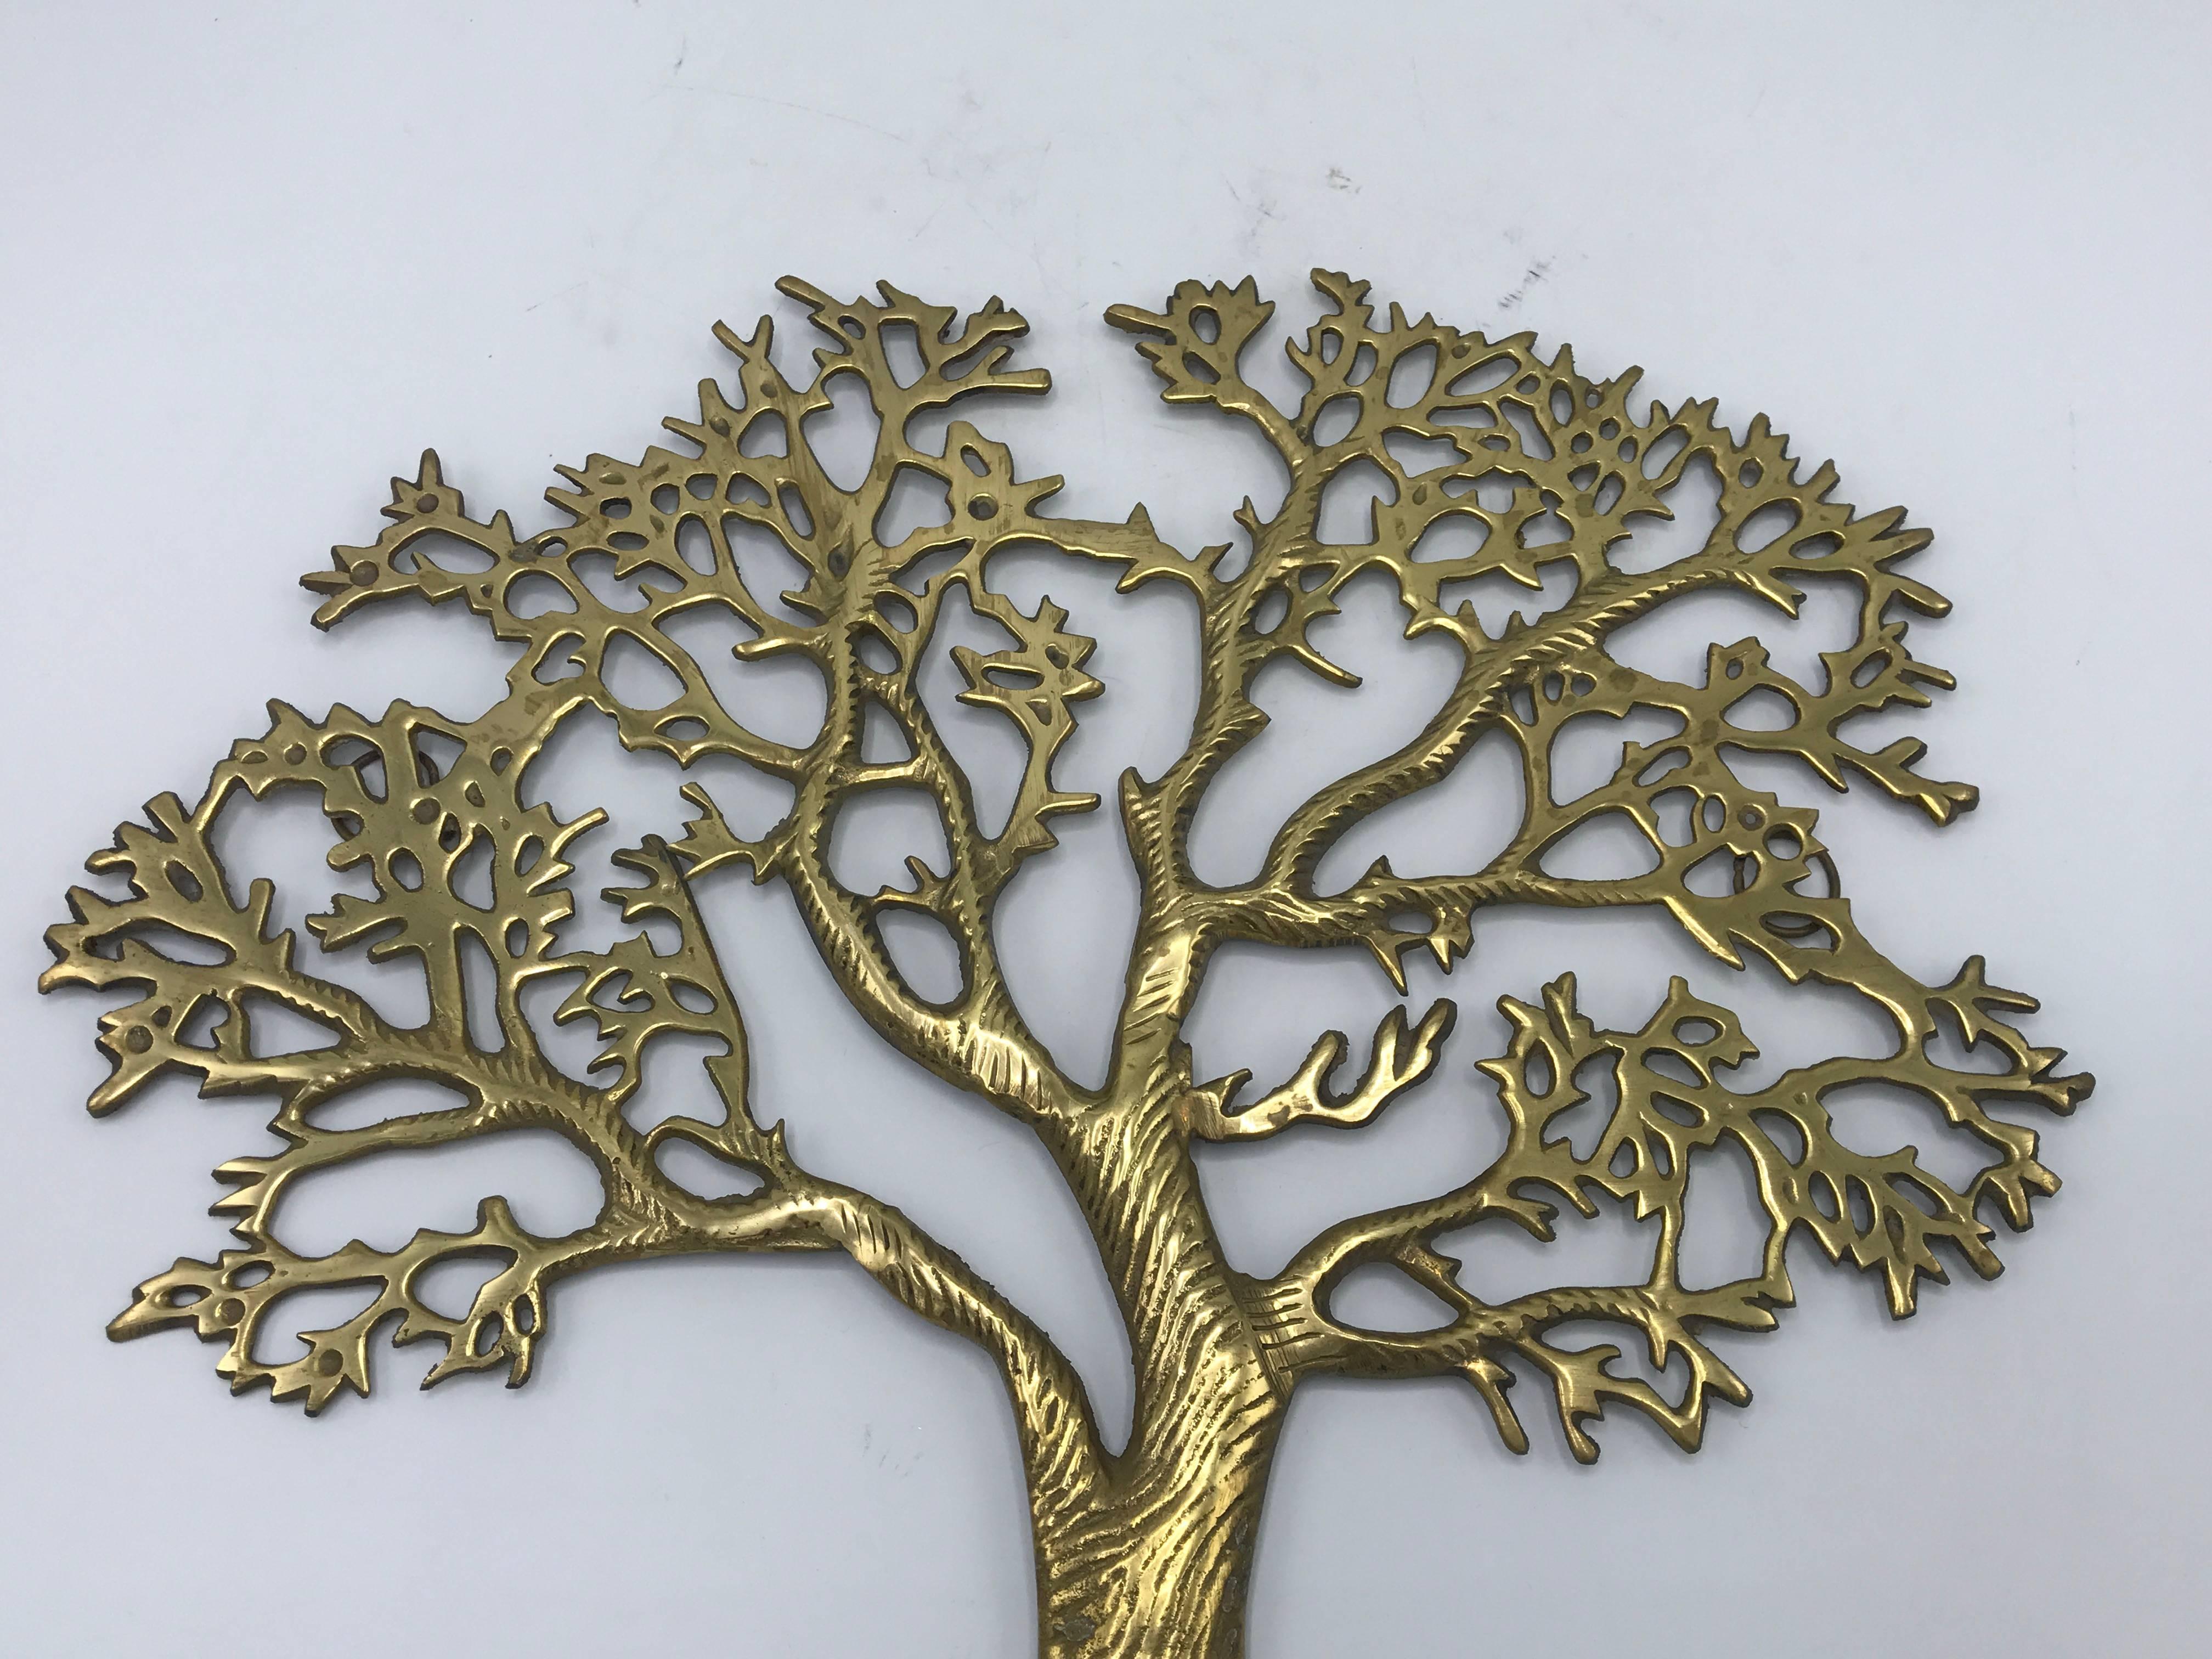 Offered is a fabulous, 1960s Italian brass tree of Life wall, bonsai tree hanging sculpture. Two hooks on backside. Light patina, can be polished.